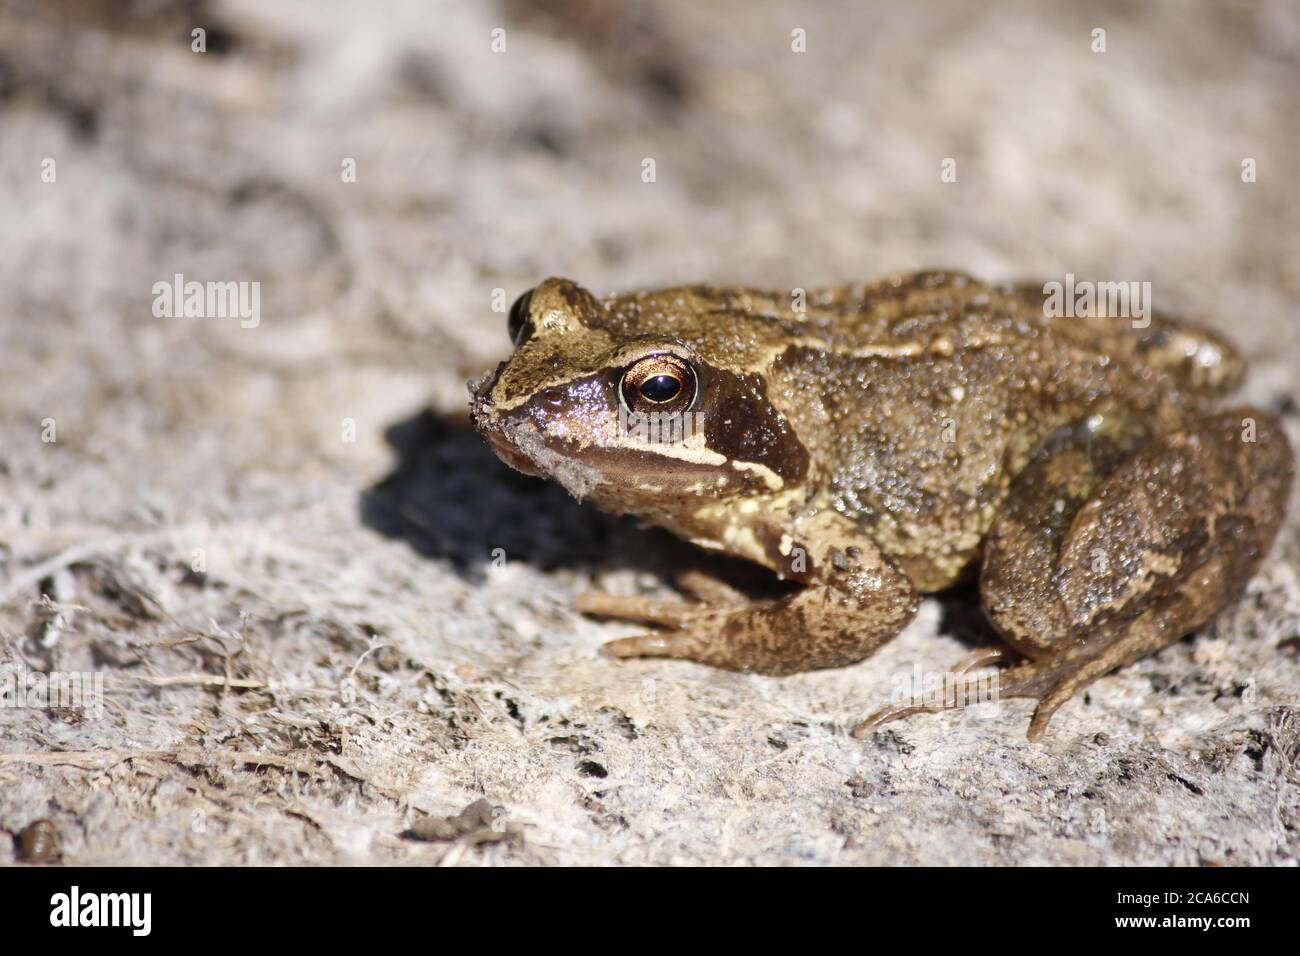 Frog resting in the dirt Stock Photo